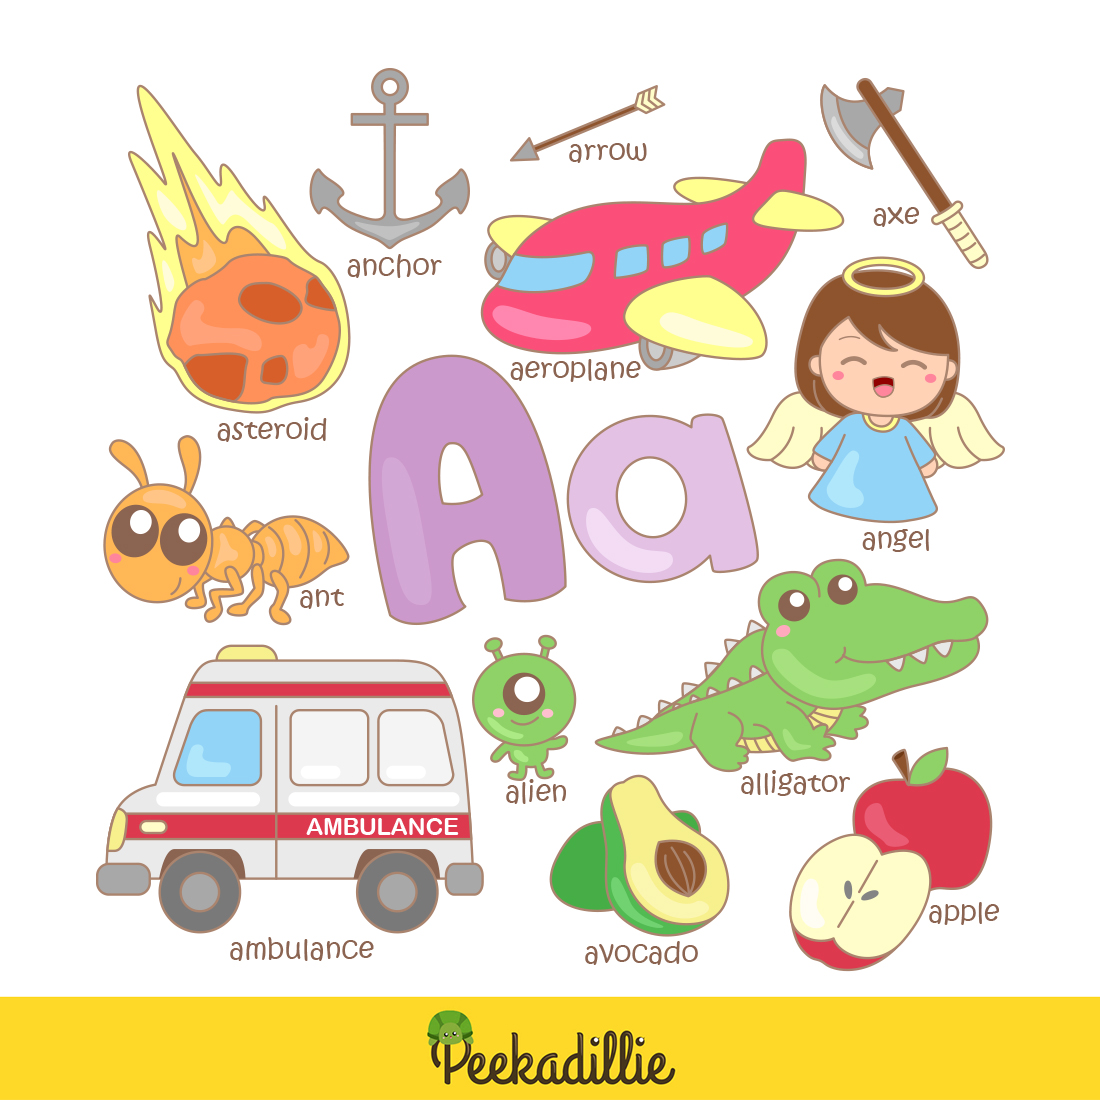 A For Vocabulary School Letter Reading Writing Font Study Learning Student Toodler Kids Angel Avocado Anchor Asteroid Ambulance Apple Alligator Ant Alien Cartoon Illustration Vector Clipart preview image.